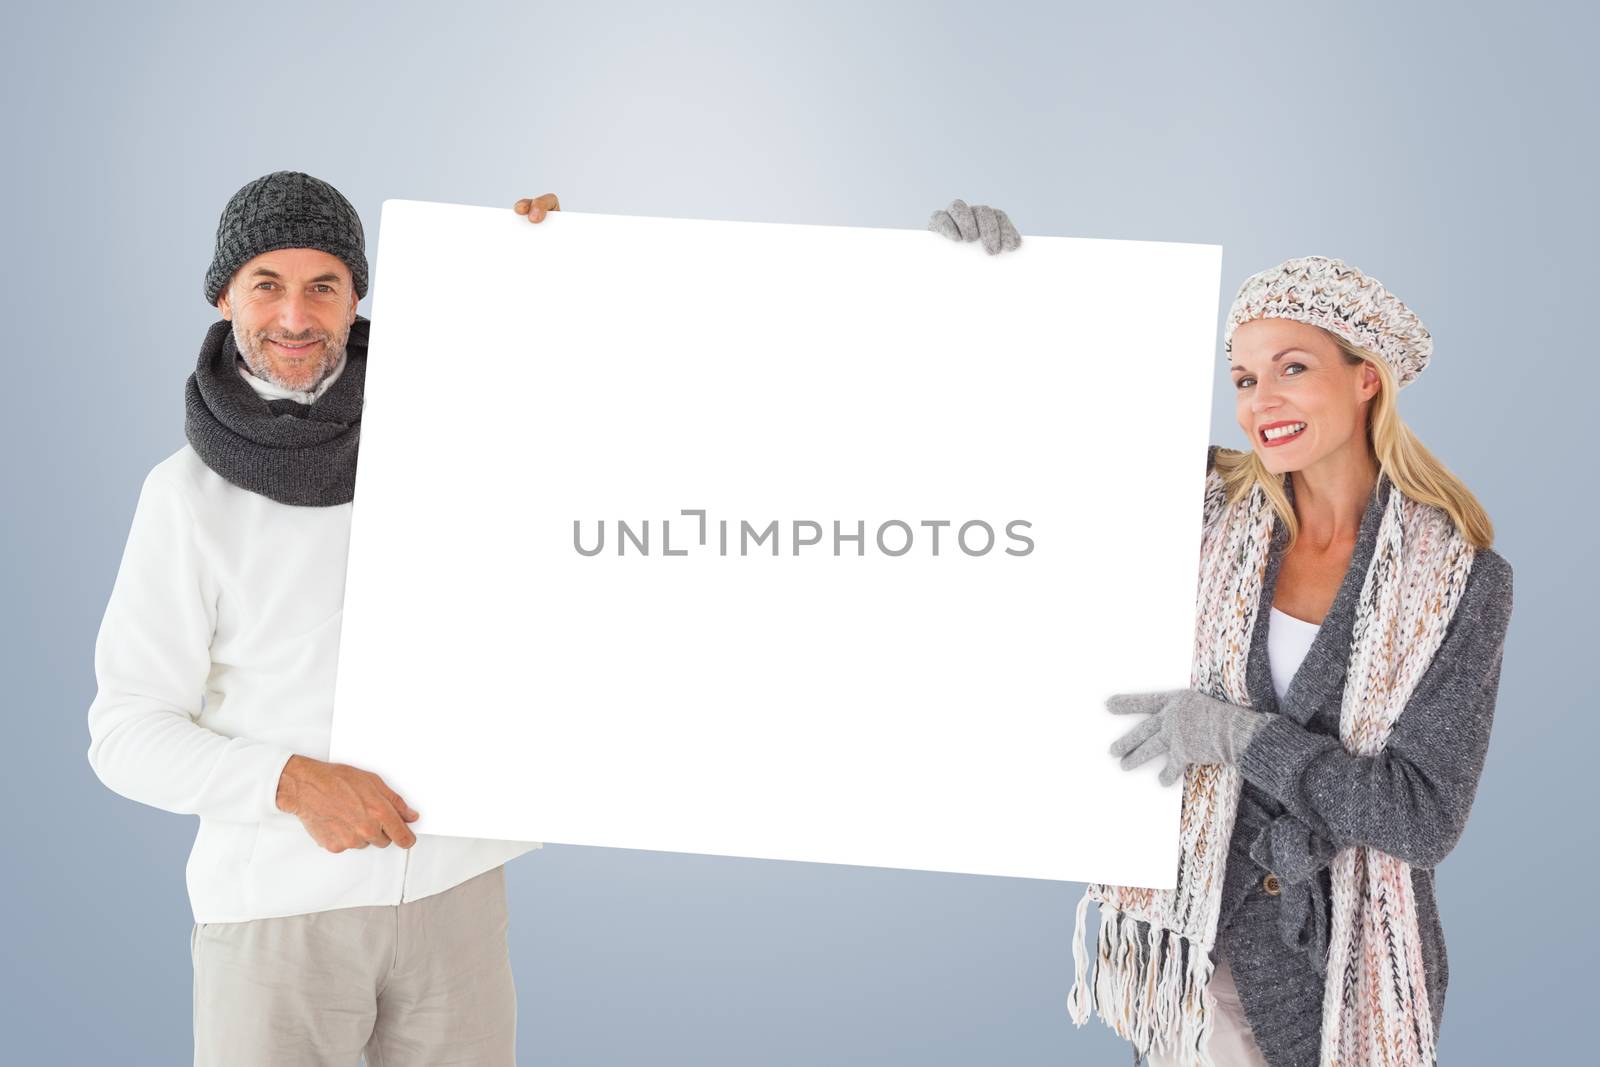 Smiling couple in winter fashion holding poster against grey vignette